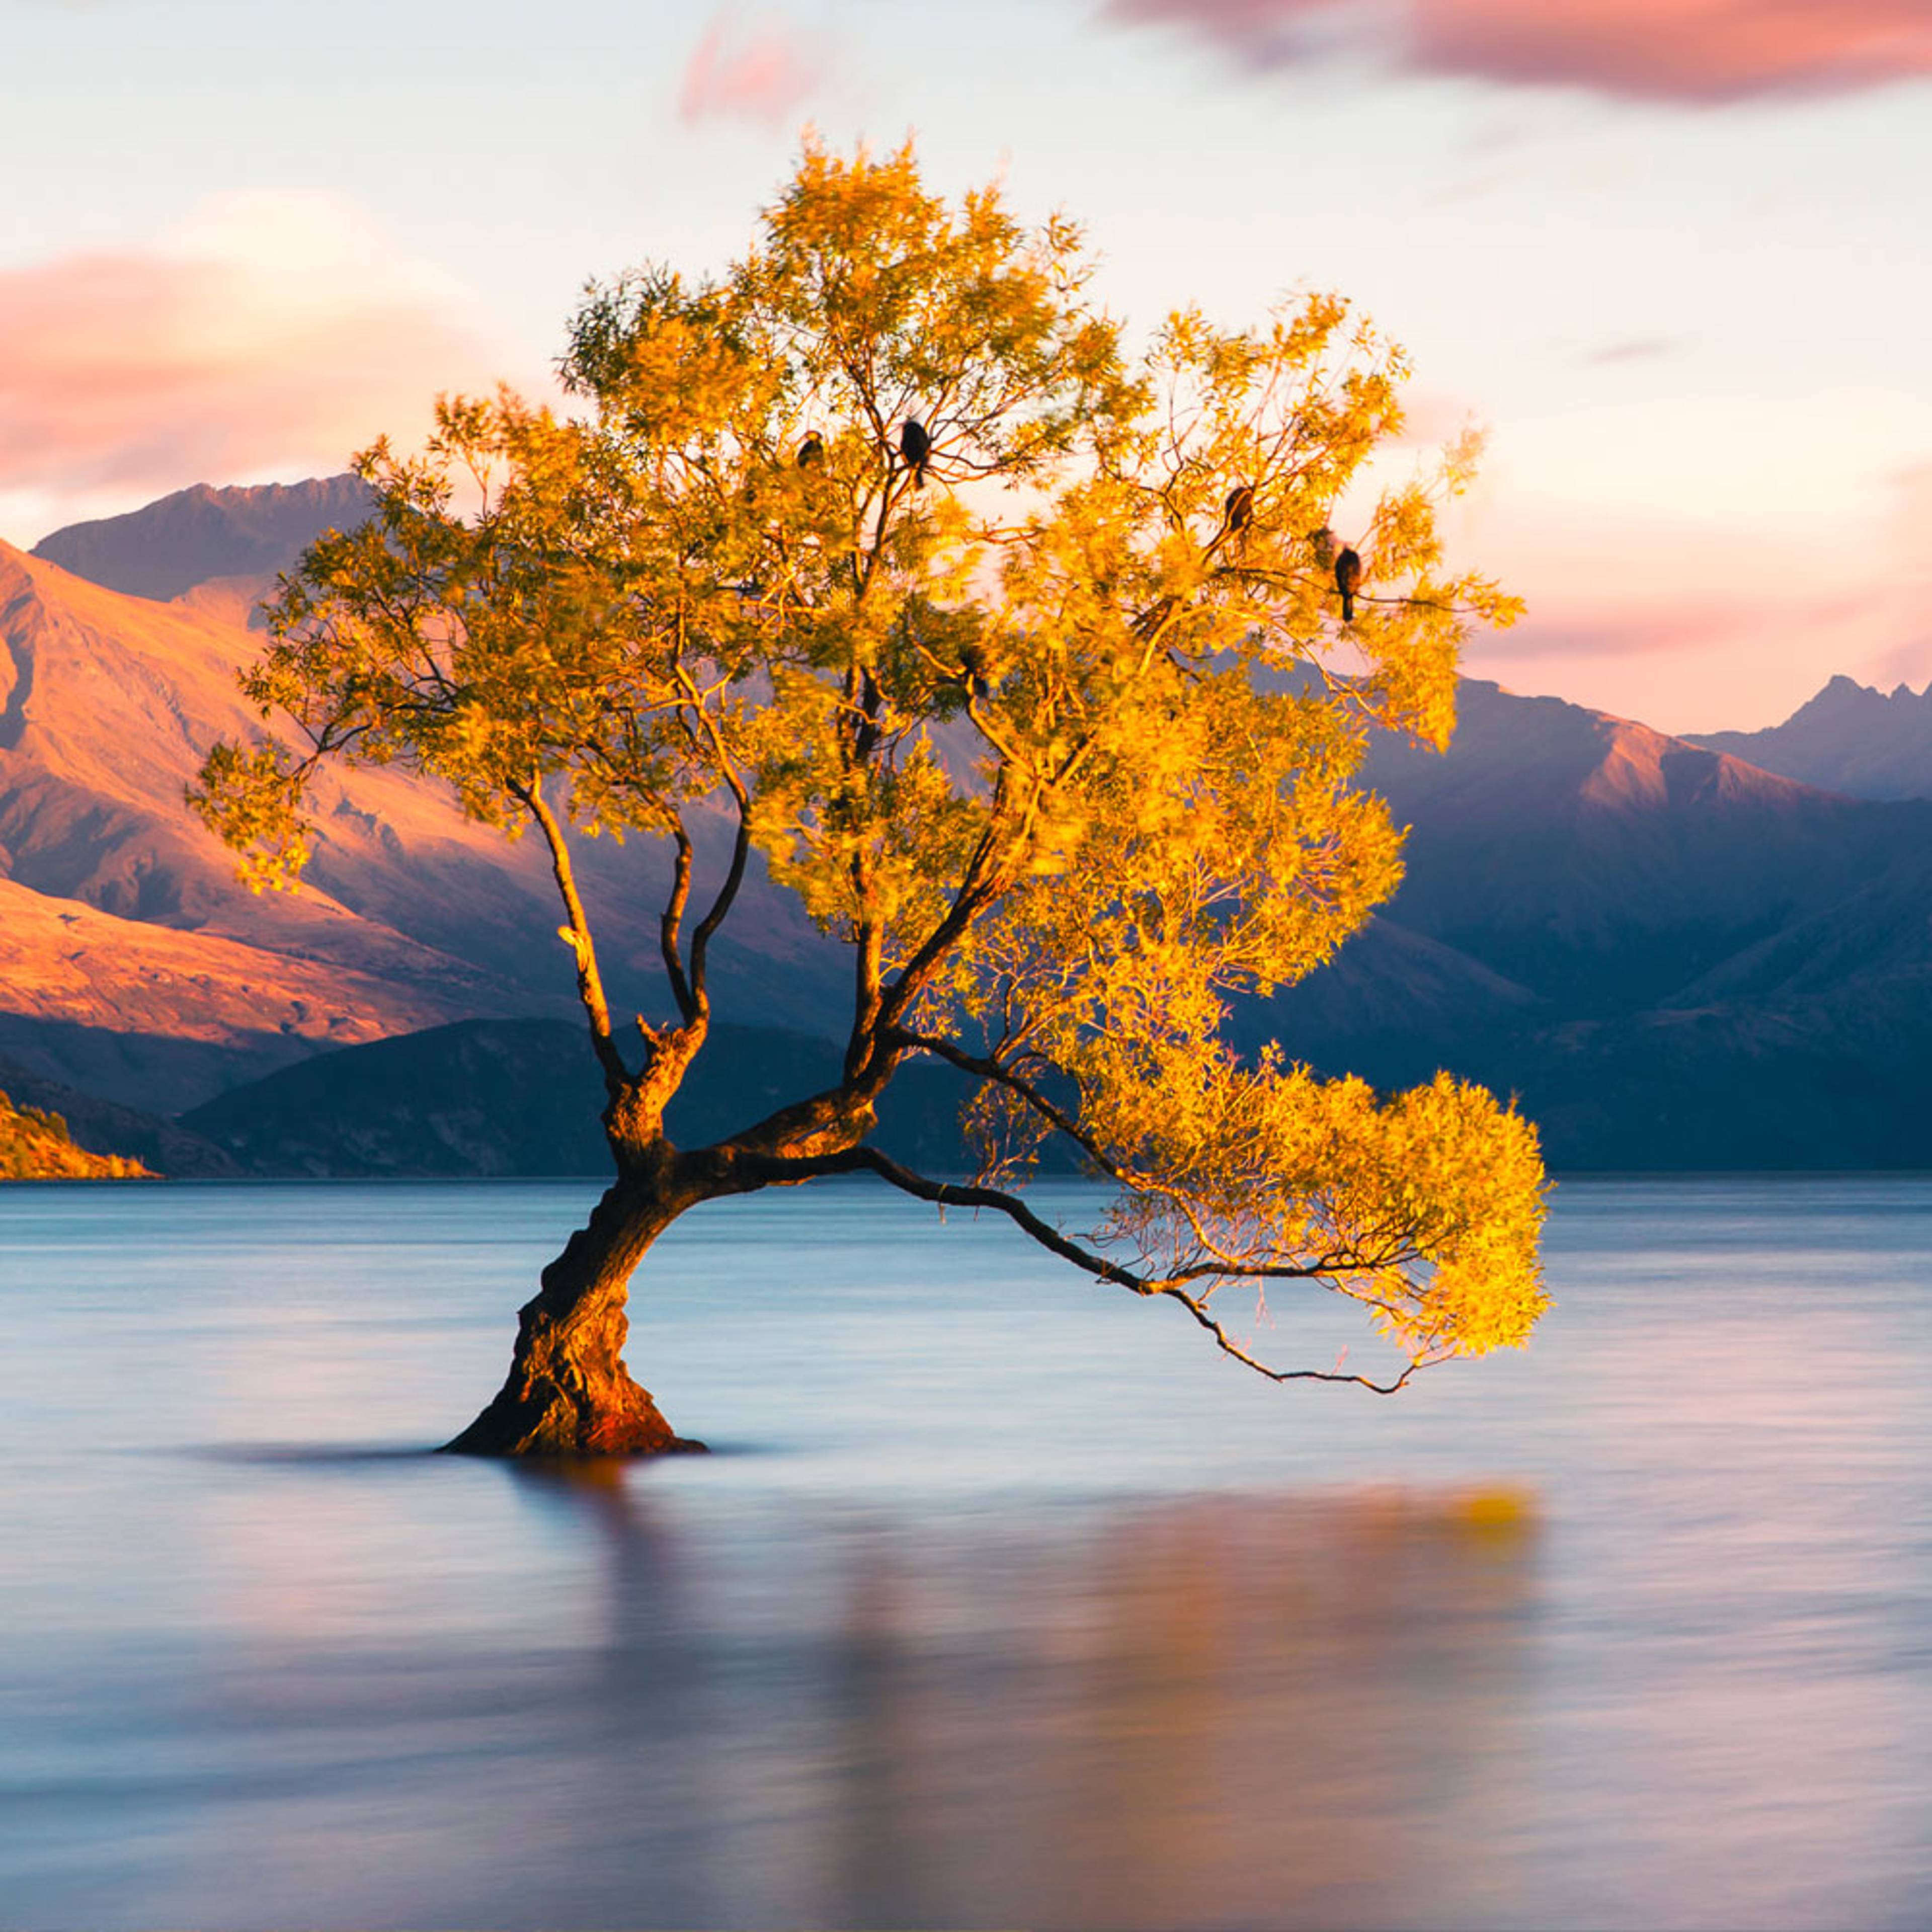 Design your perfect nature holiday with a local expert in New Zealand